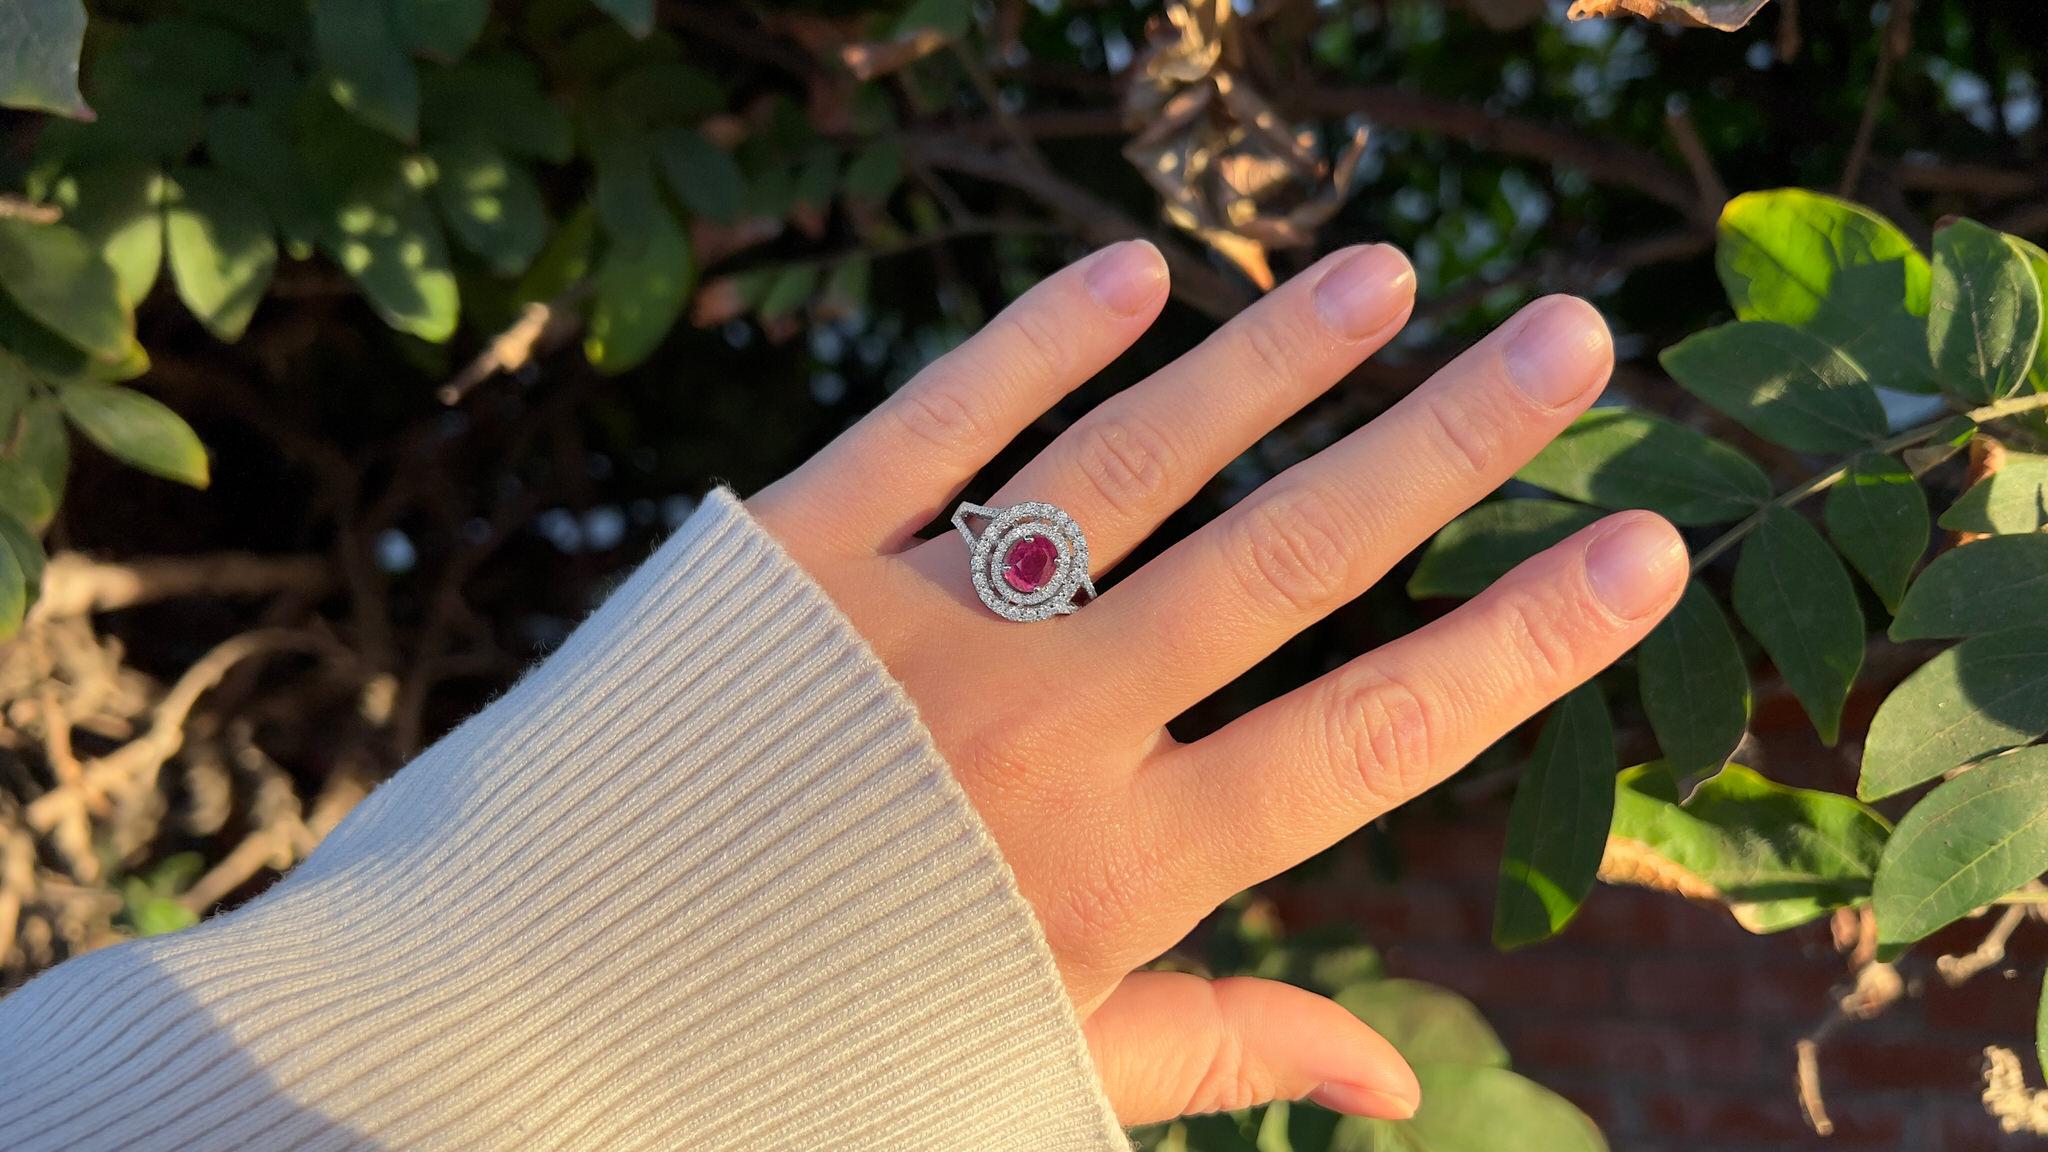 Very Fine Ruby = 2.30 Carat
(Cut: Oval, Color: Red, Origin: Natural)
Diamond = 1.48 Carats
(Cut: Round, Color: F, Clarity: VS)
Metal = 18K White Gold
Ring Size = 7.75
